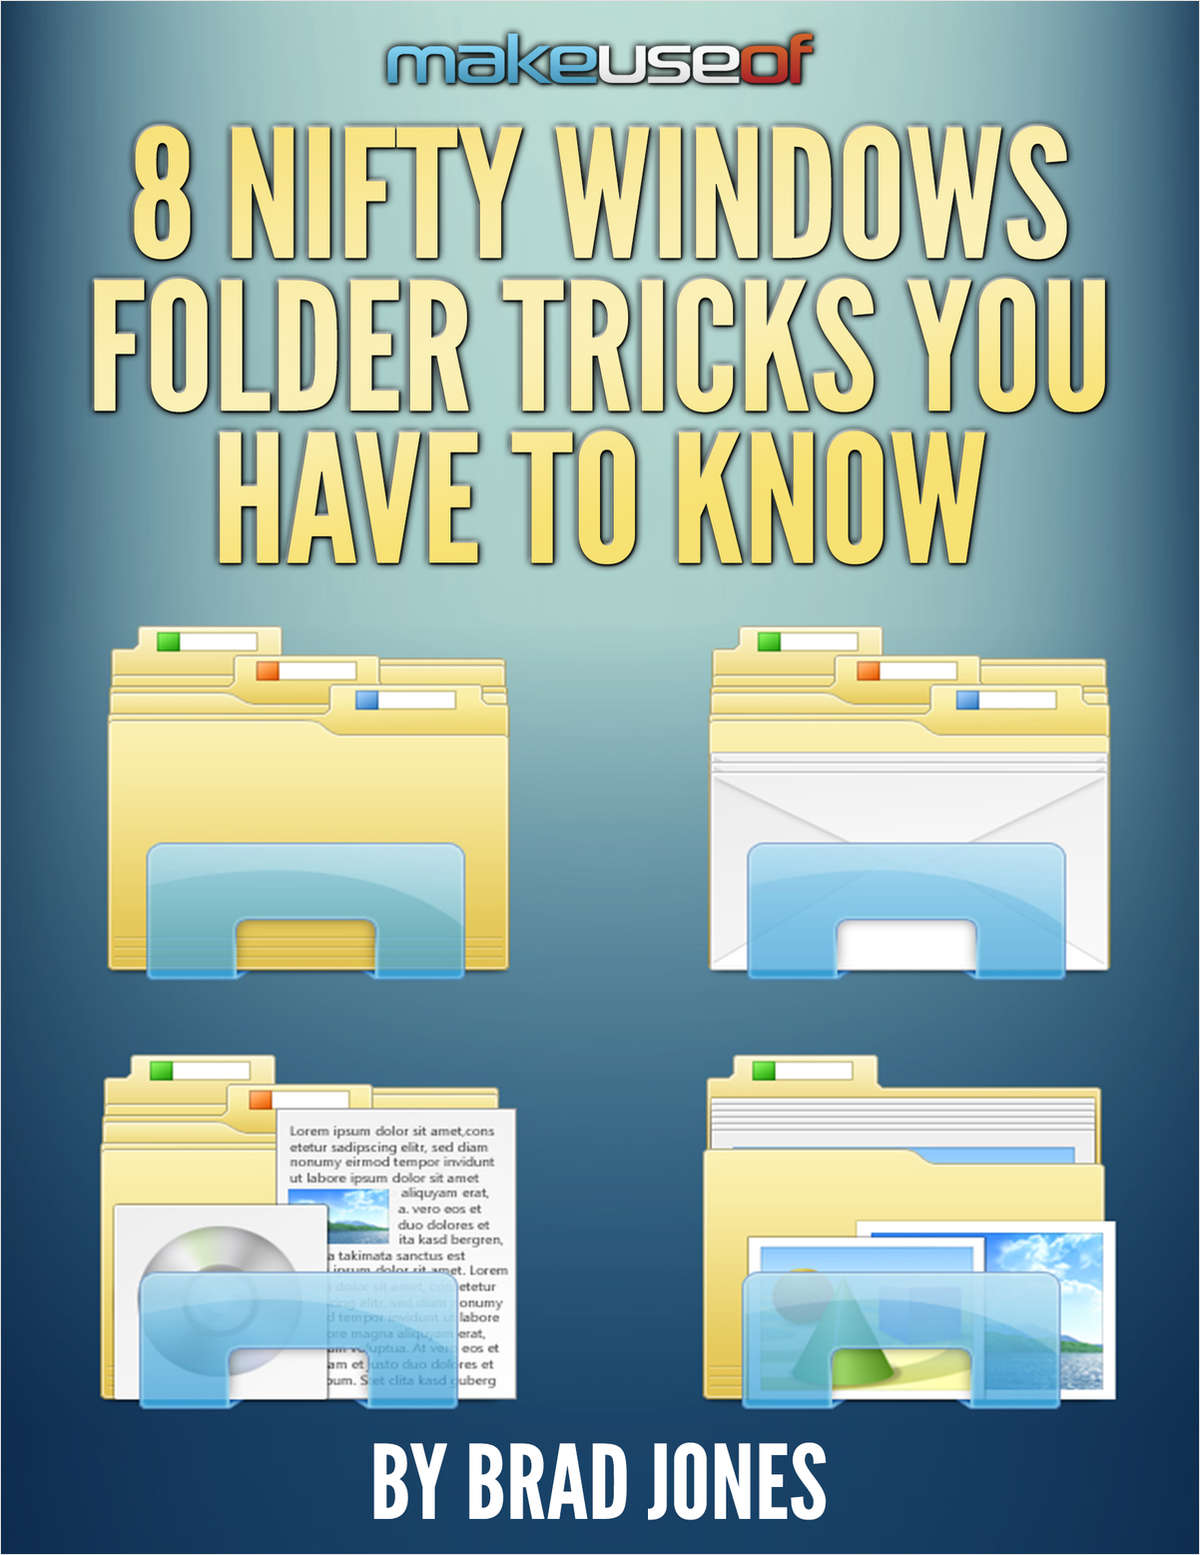 8 Nifty Windows Folder Tricks You Have to Know